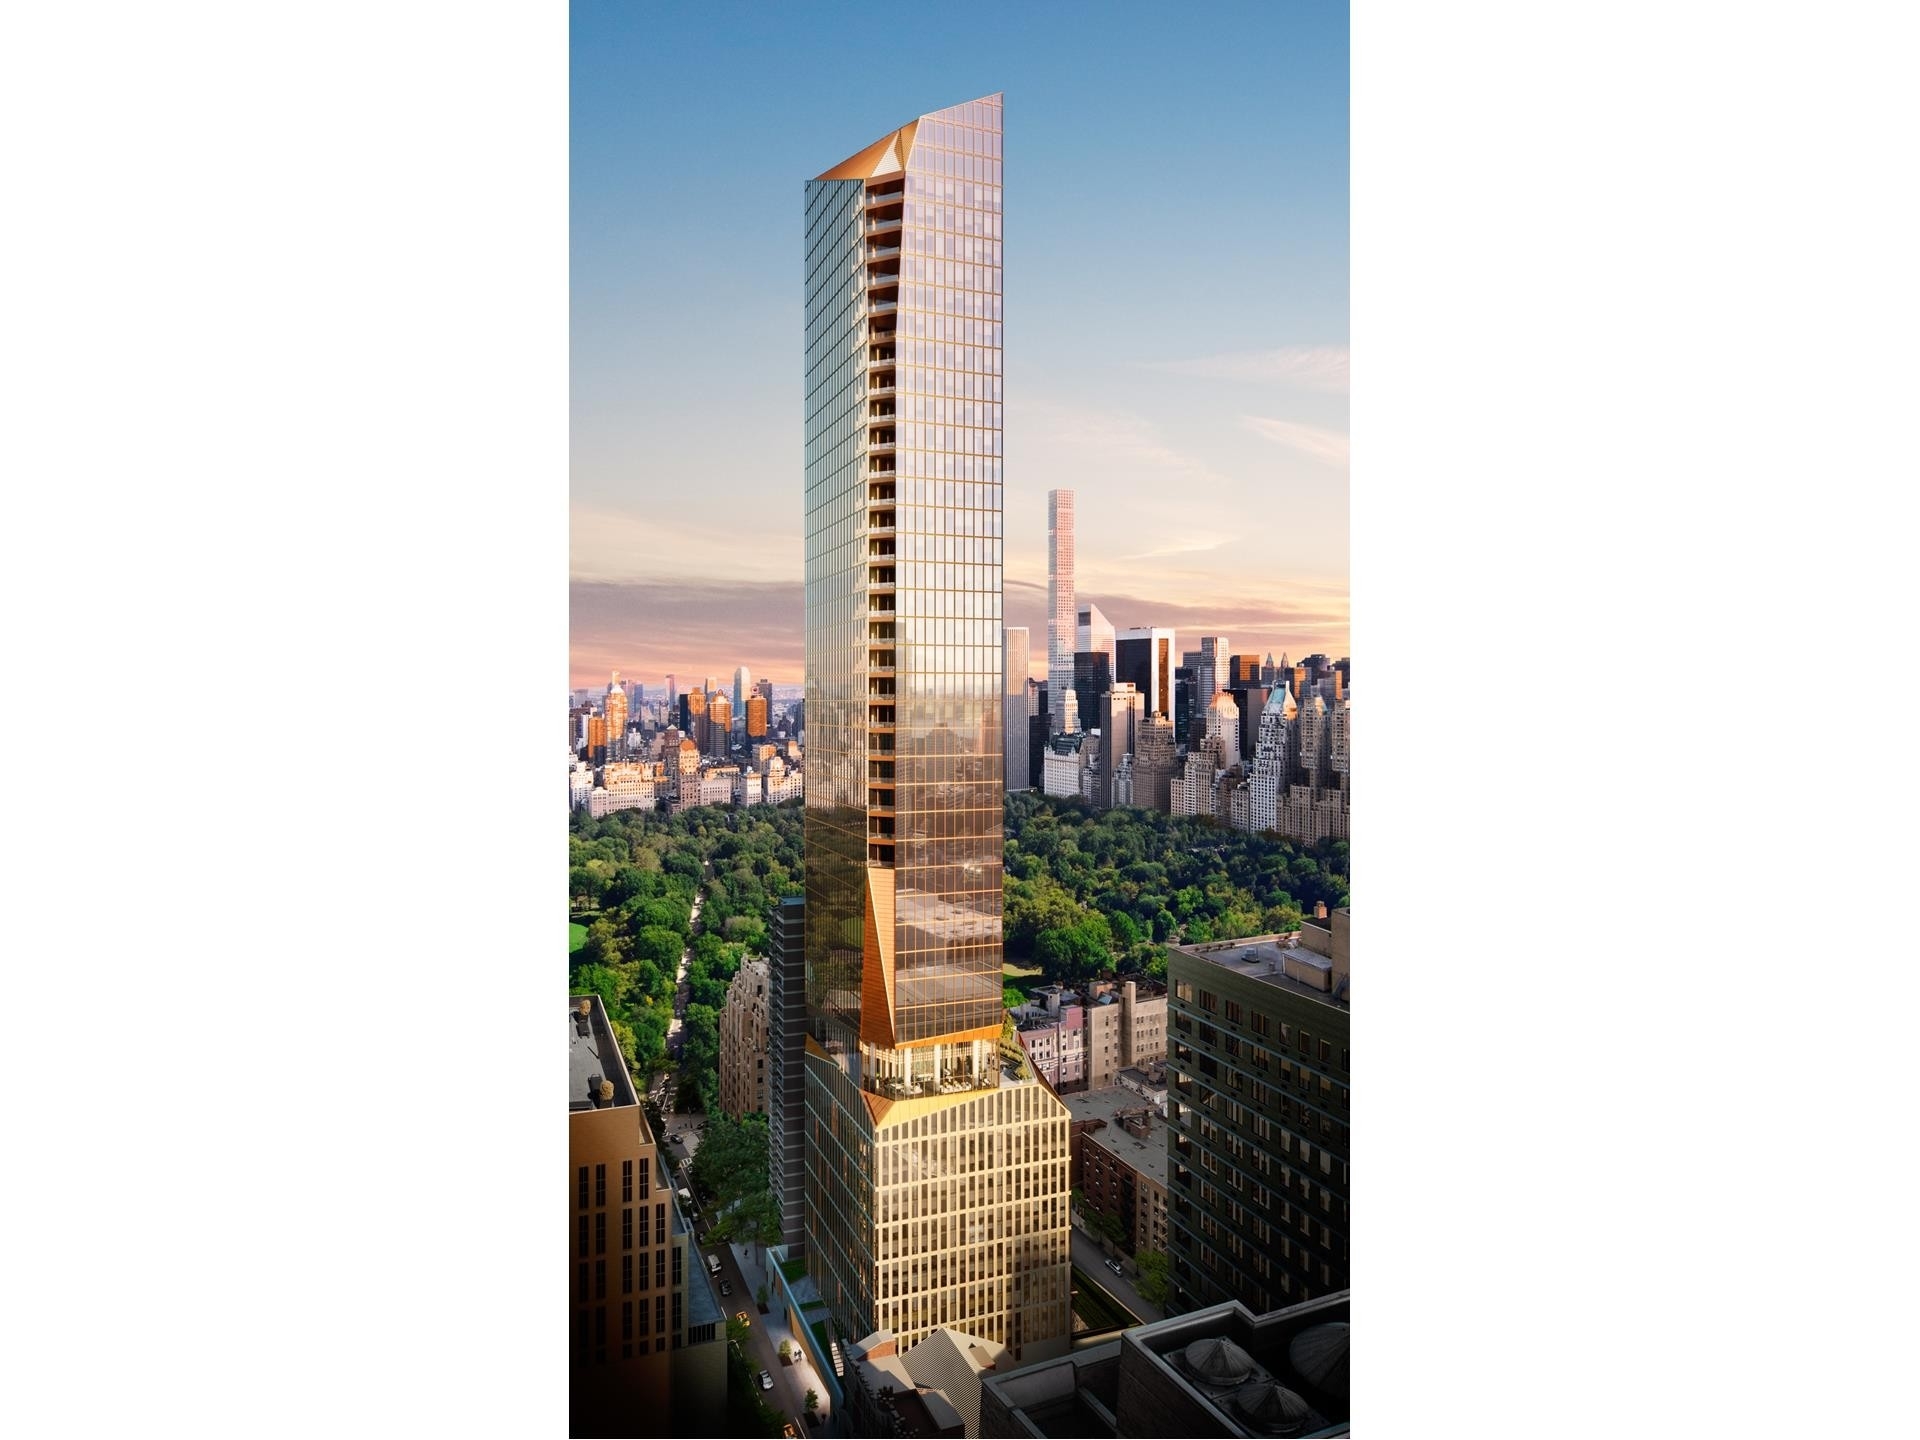 Condominium for Sale at 50 West 66Th Street, 50 W 66TH ST, 40W Lincoln Square, New York, New York 10023